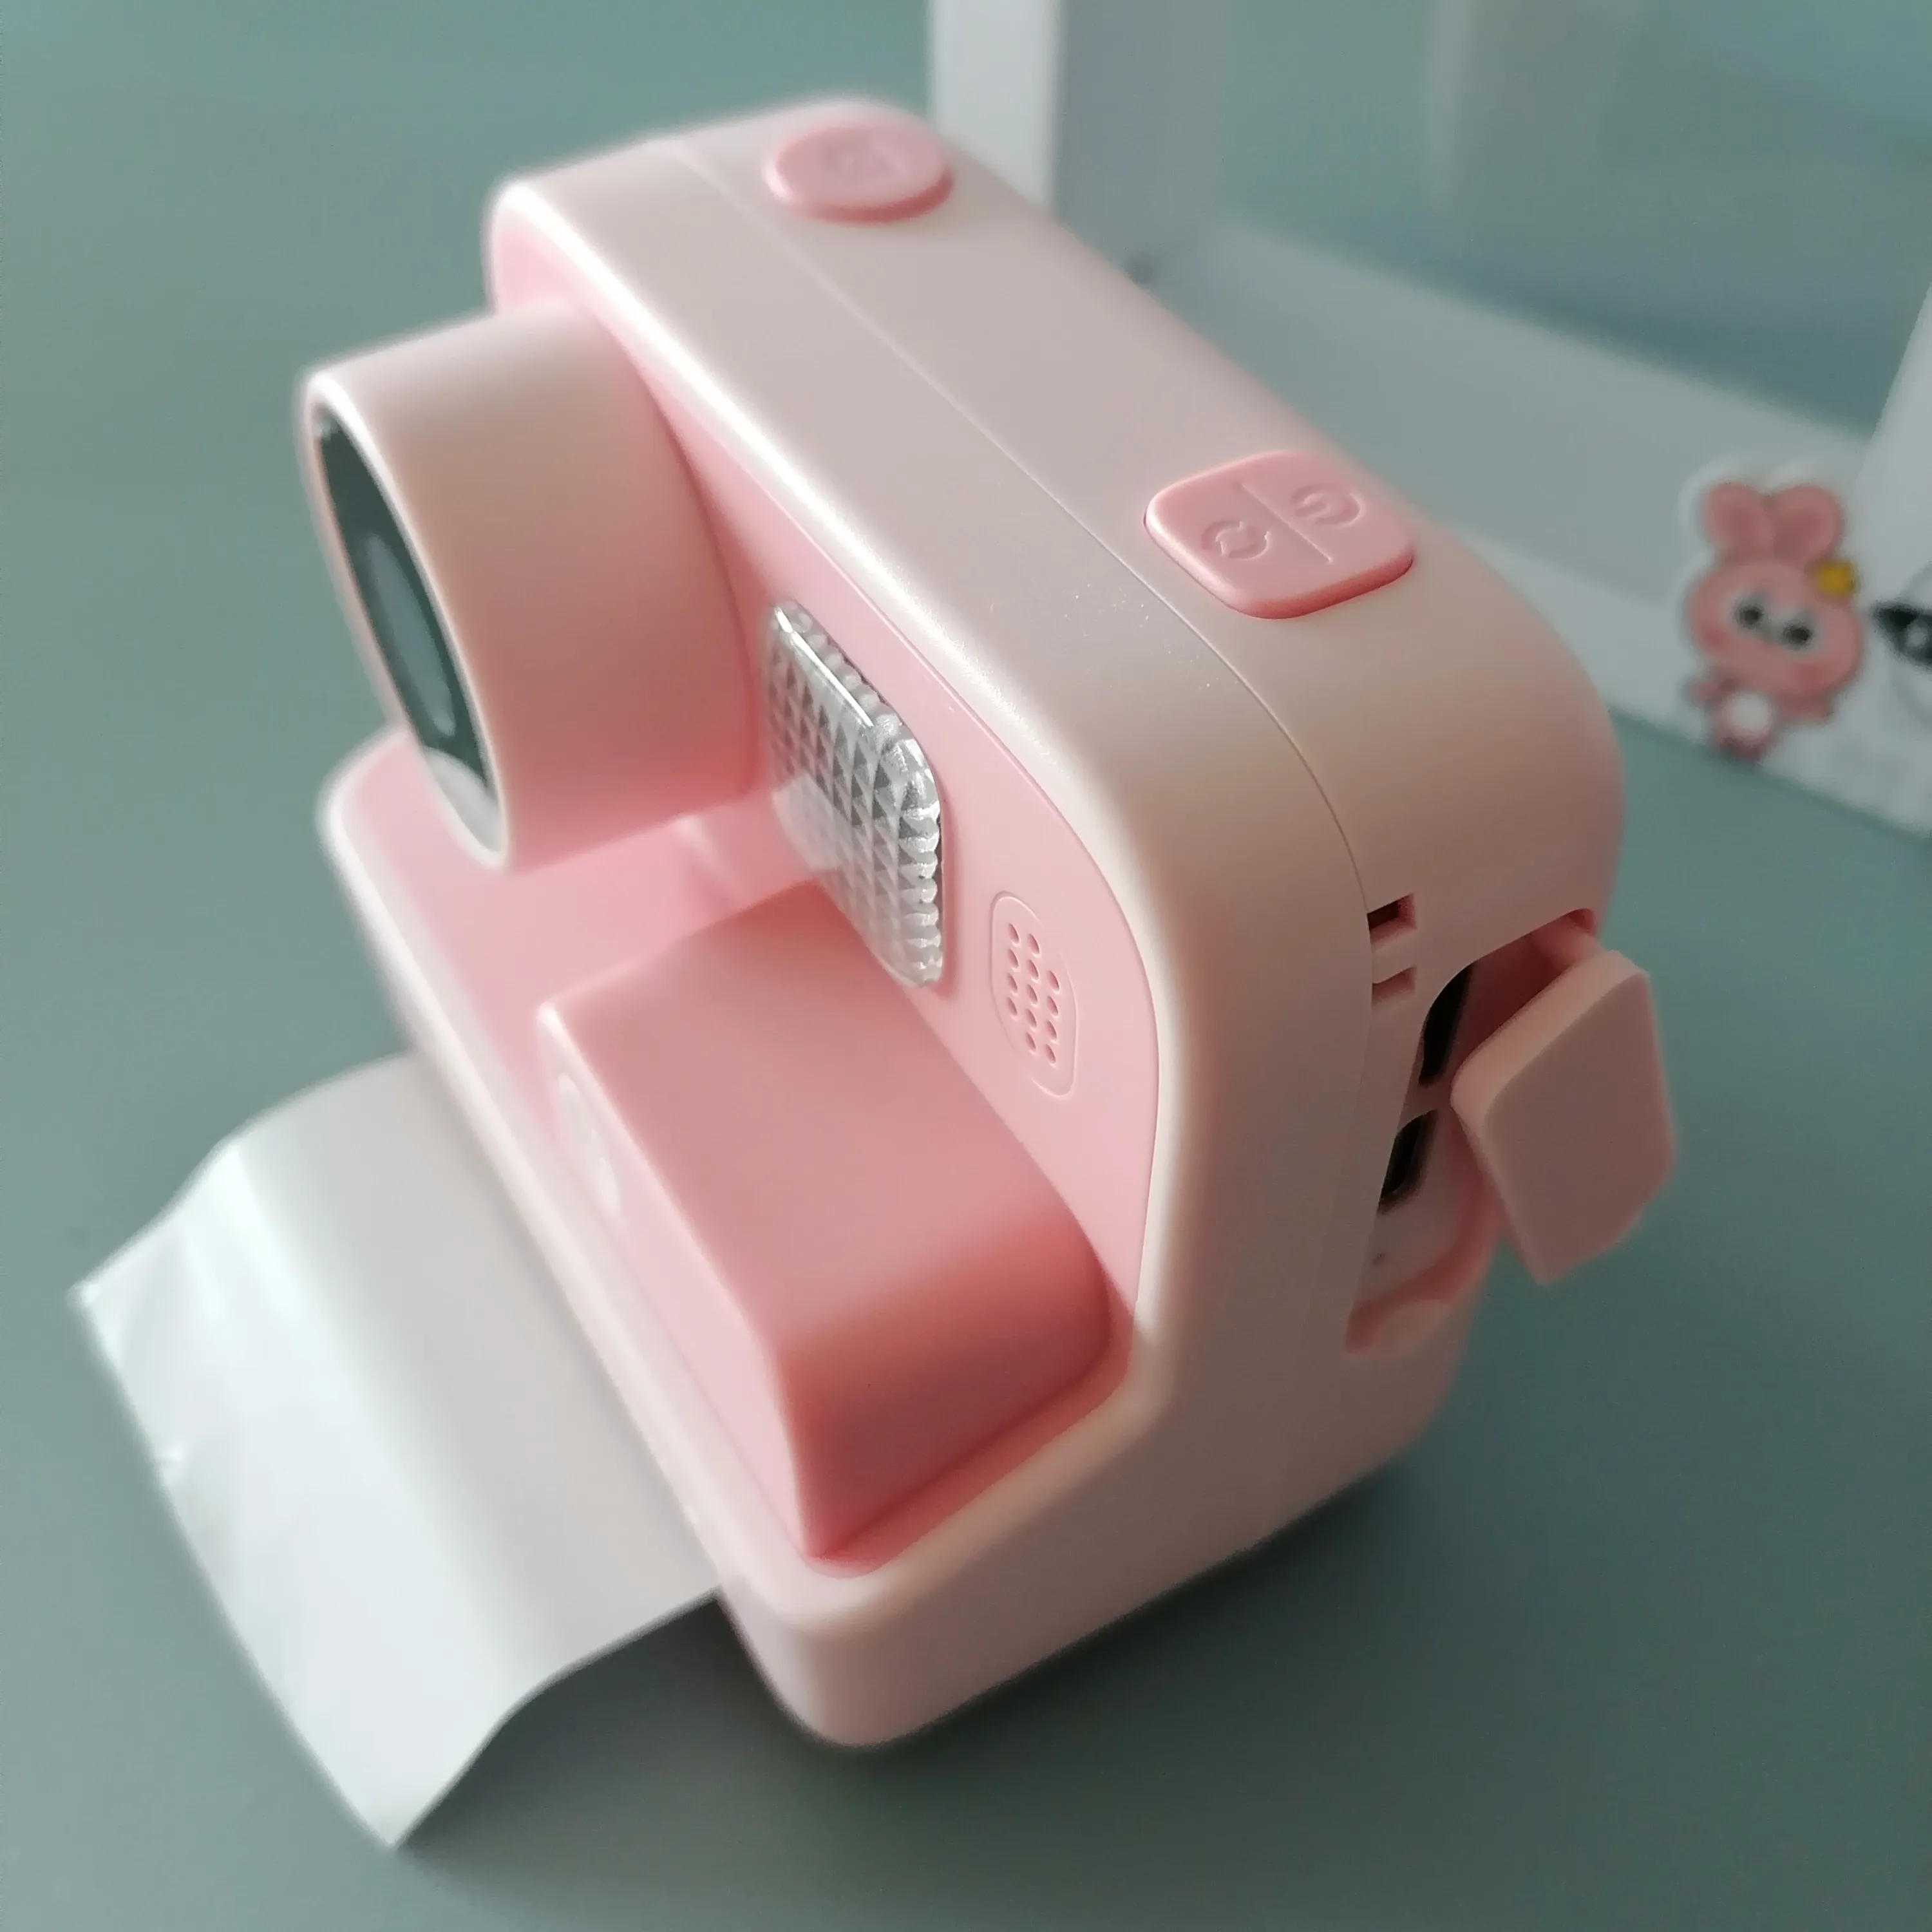 S508447e174c54a8bae3a9c0931d08110Y Instant Print Kids Camera 2.0" 1080P Video Photo with Thermal Print Paper